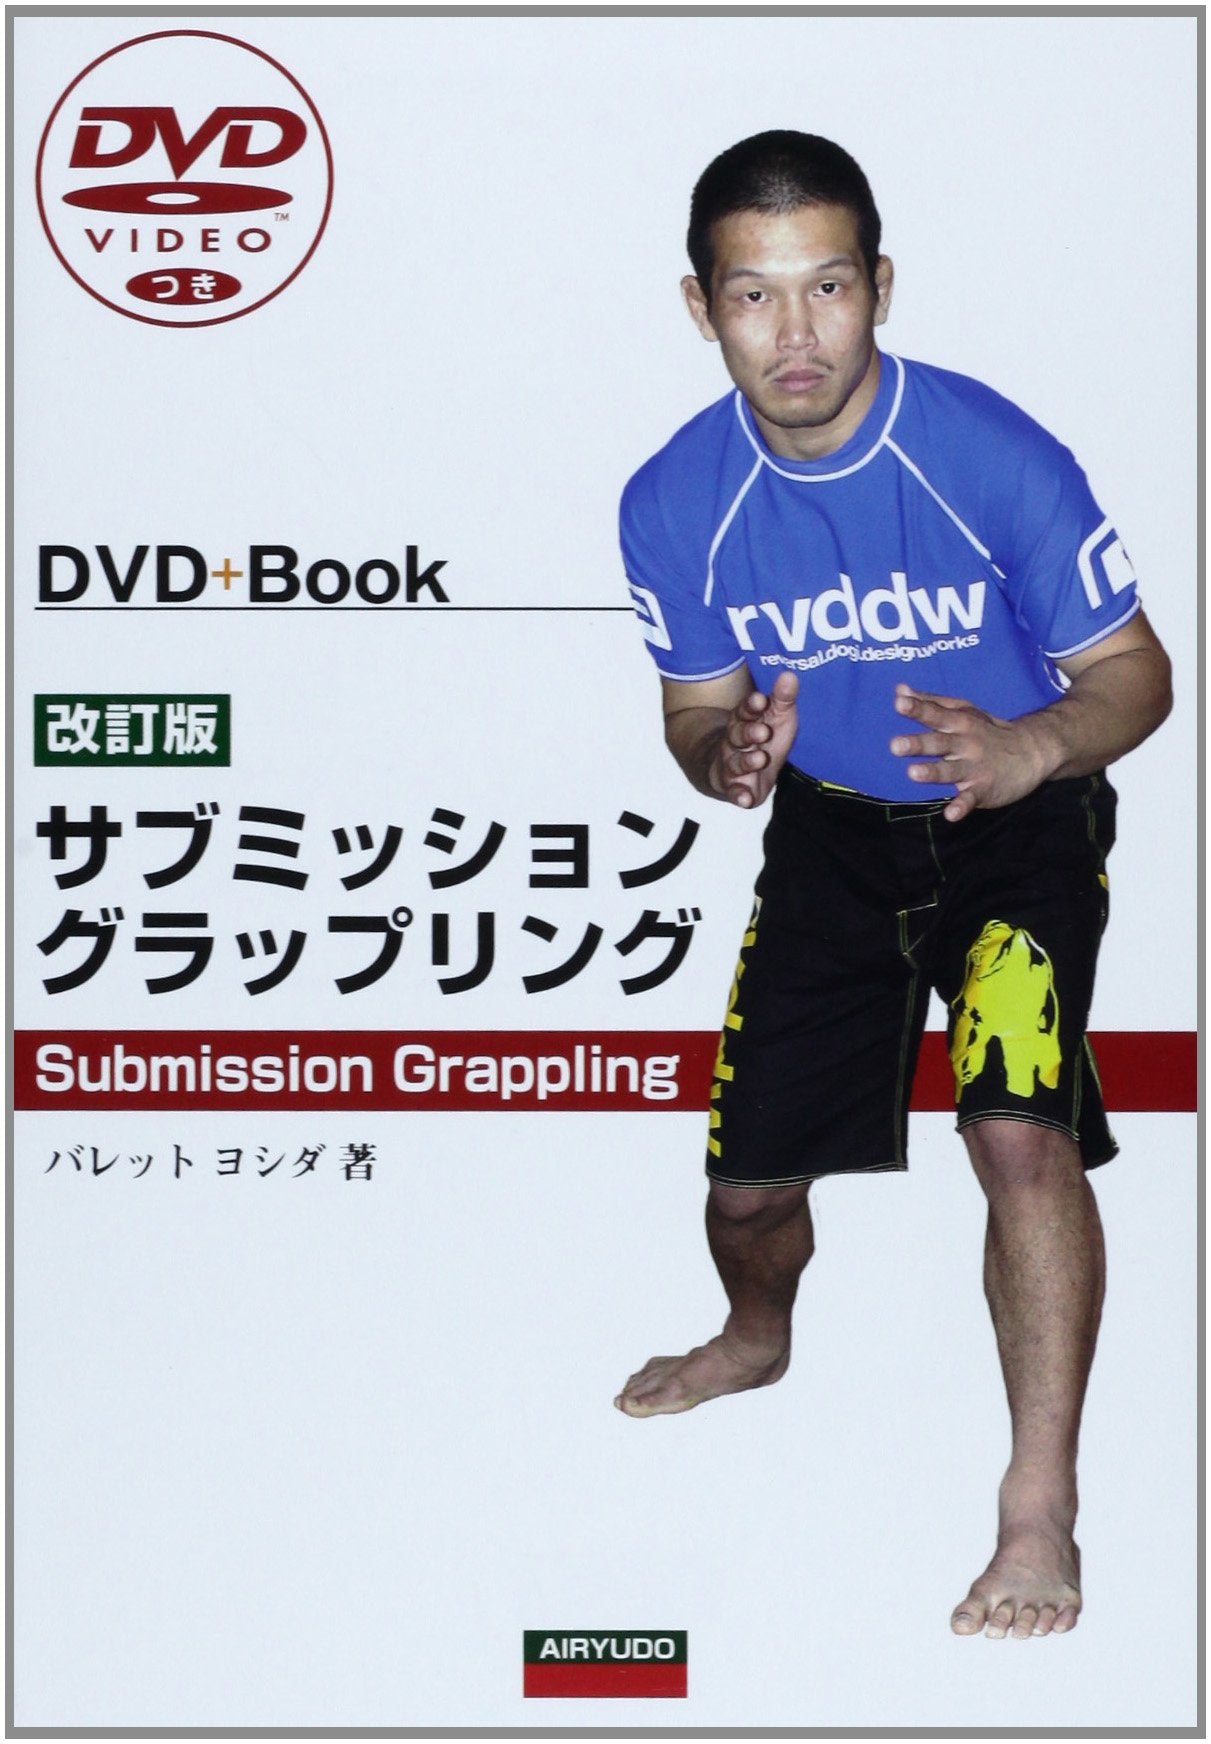 Principles of the Art of Submission Grappling Book & DVD by Baret Yoshida - Budovideos